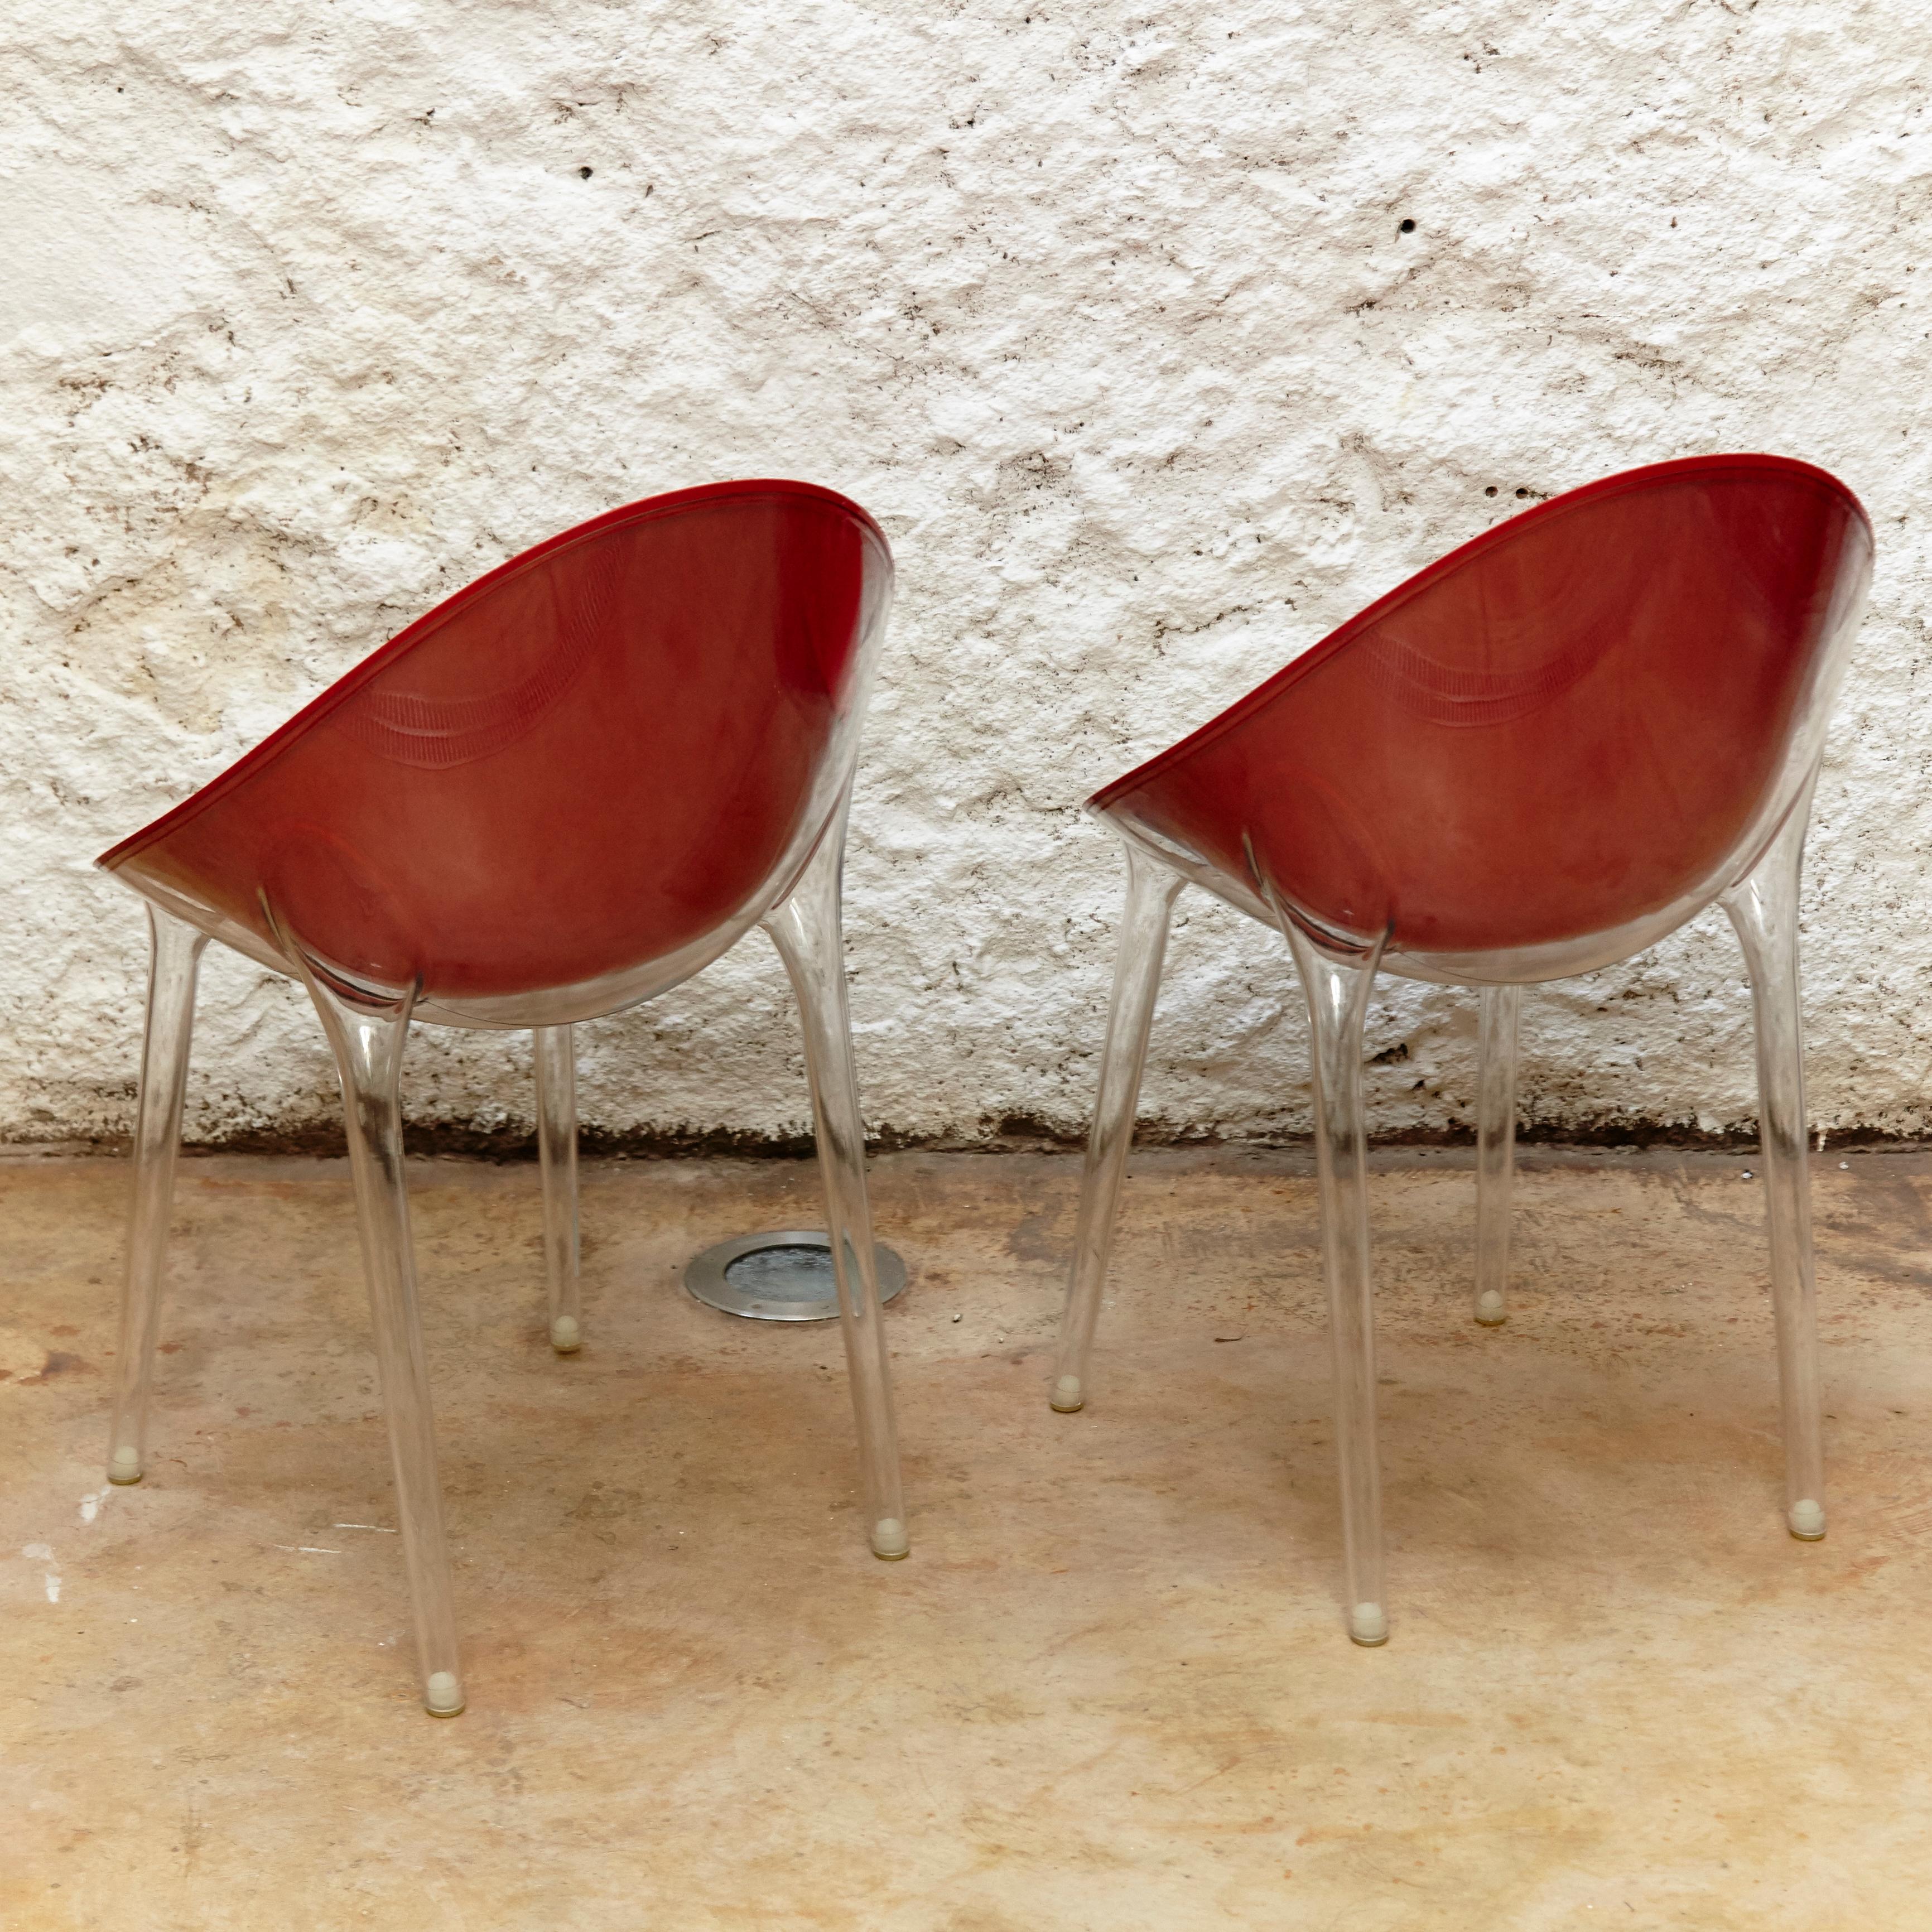 Contemporary Set of 4 Philippe Starck Impossible Chair Red by Kartell, circa 2008